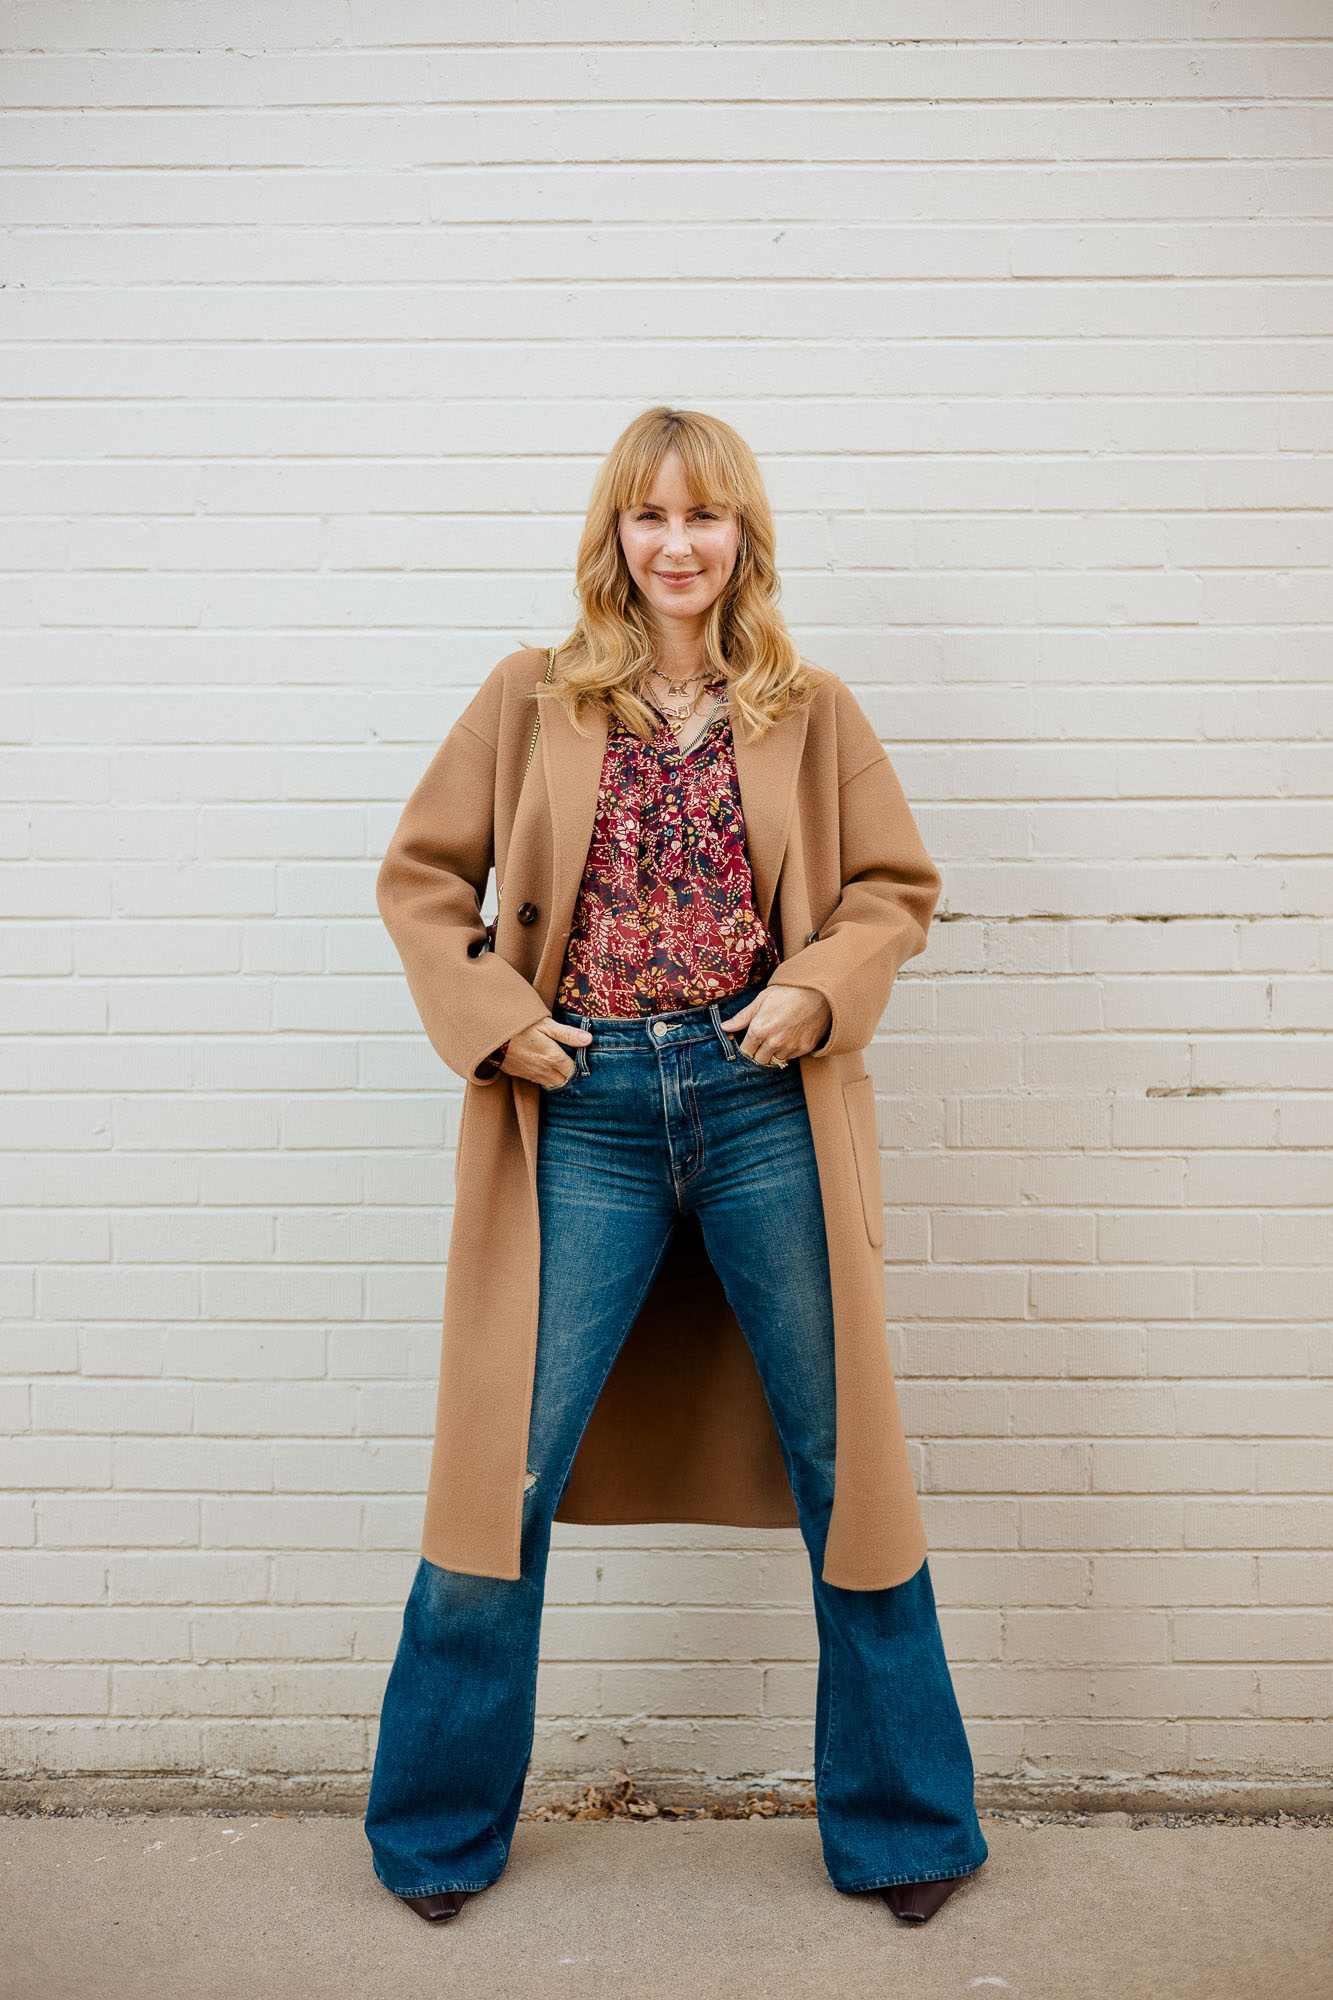 Wearing the Anine Bing Dylan coat with a BA&SH fall red print blouse and Mother flare jeans.